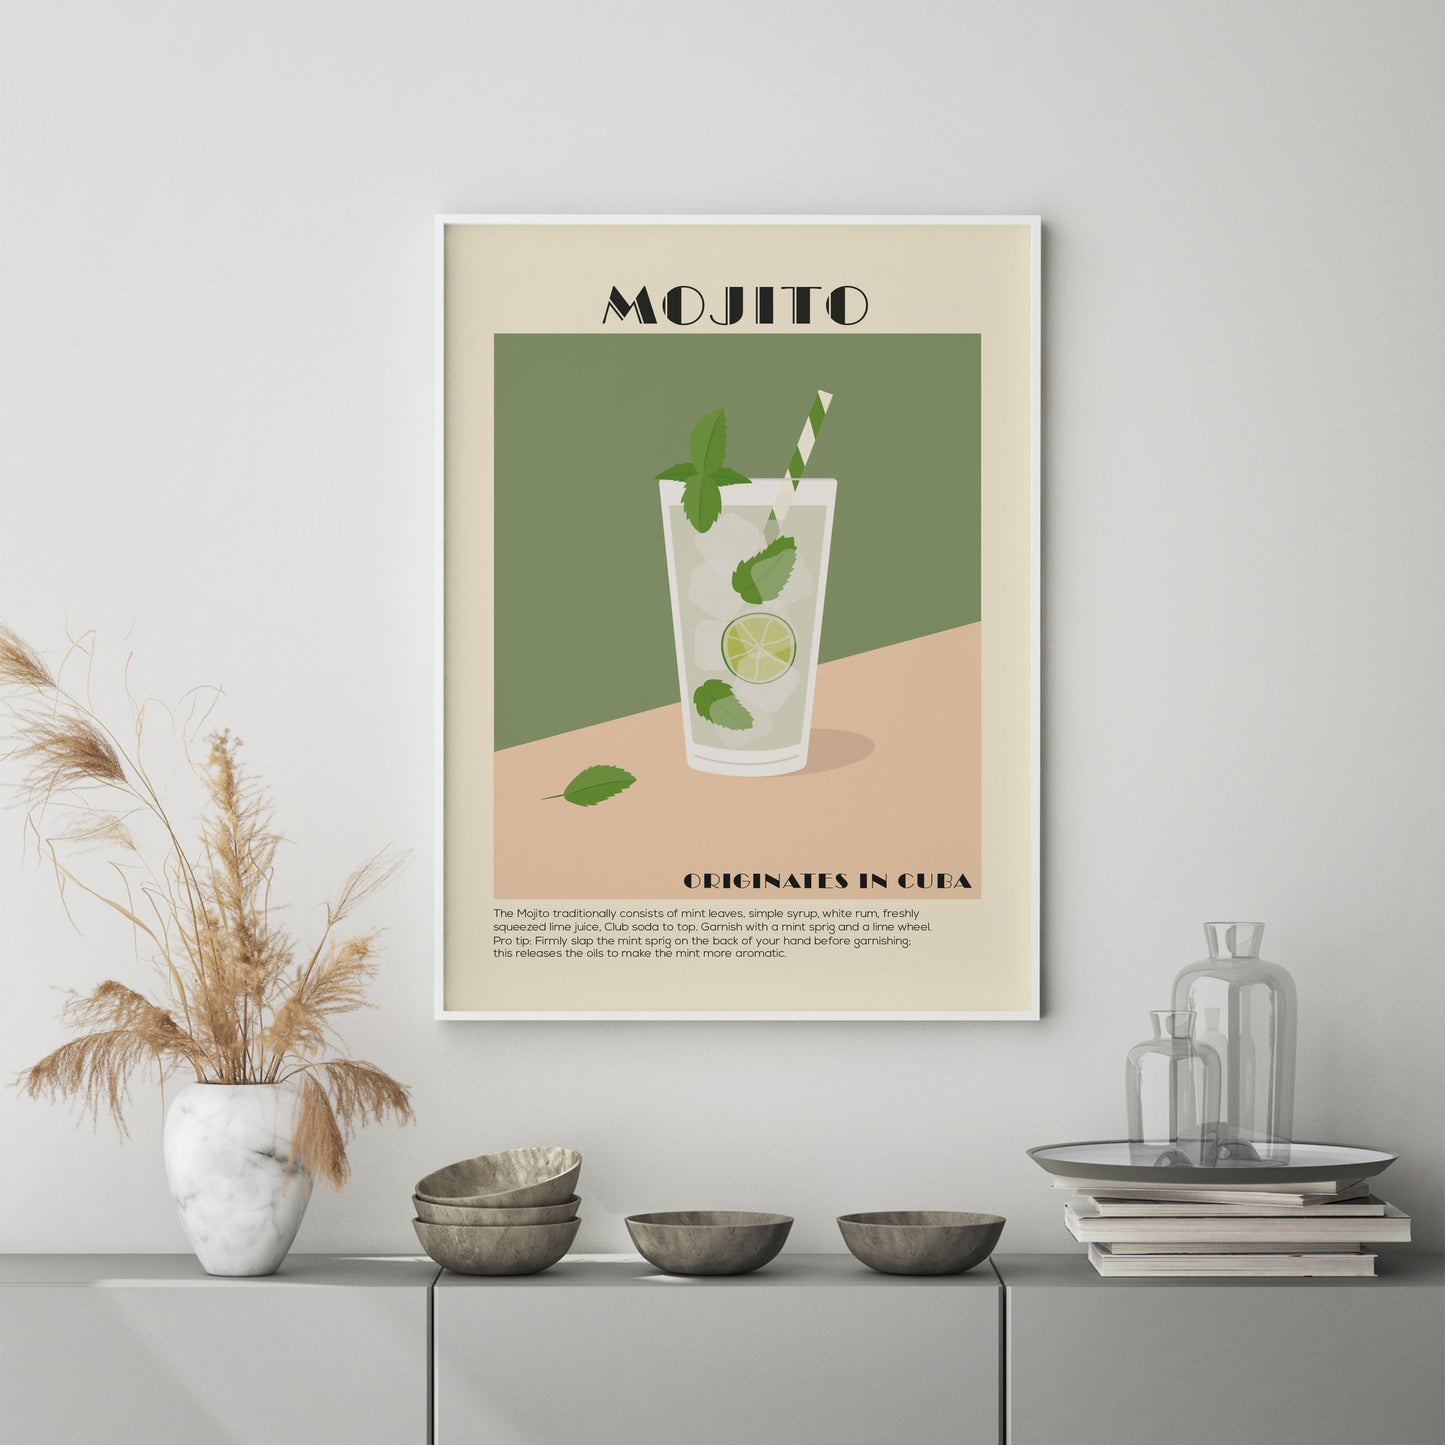 Mojito Cocktail Print in a Mid Century Modern Style